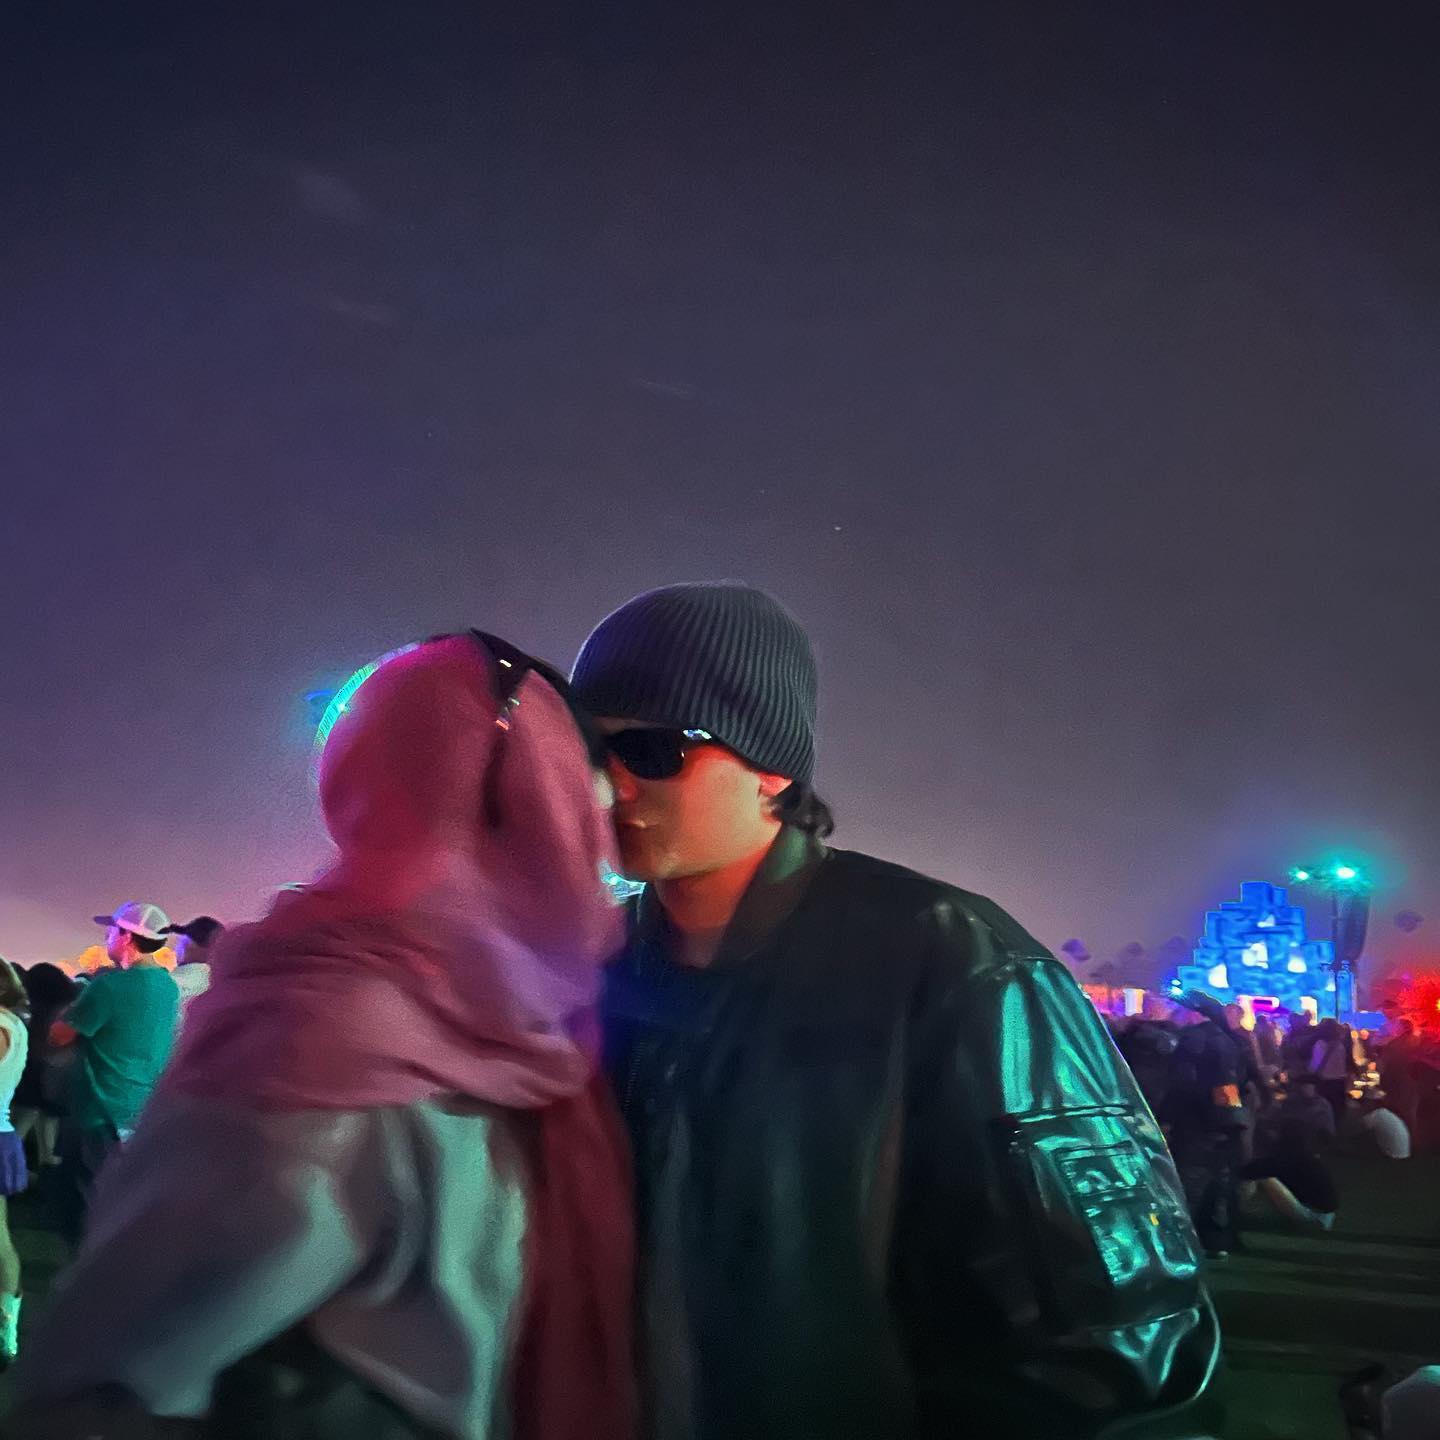 The up-and-coming musician shared a couple of photos of her kissing her fiancé, Pinkus